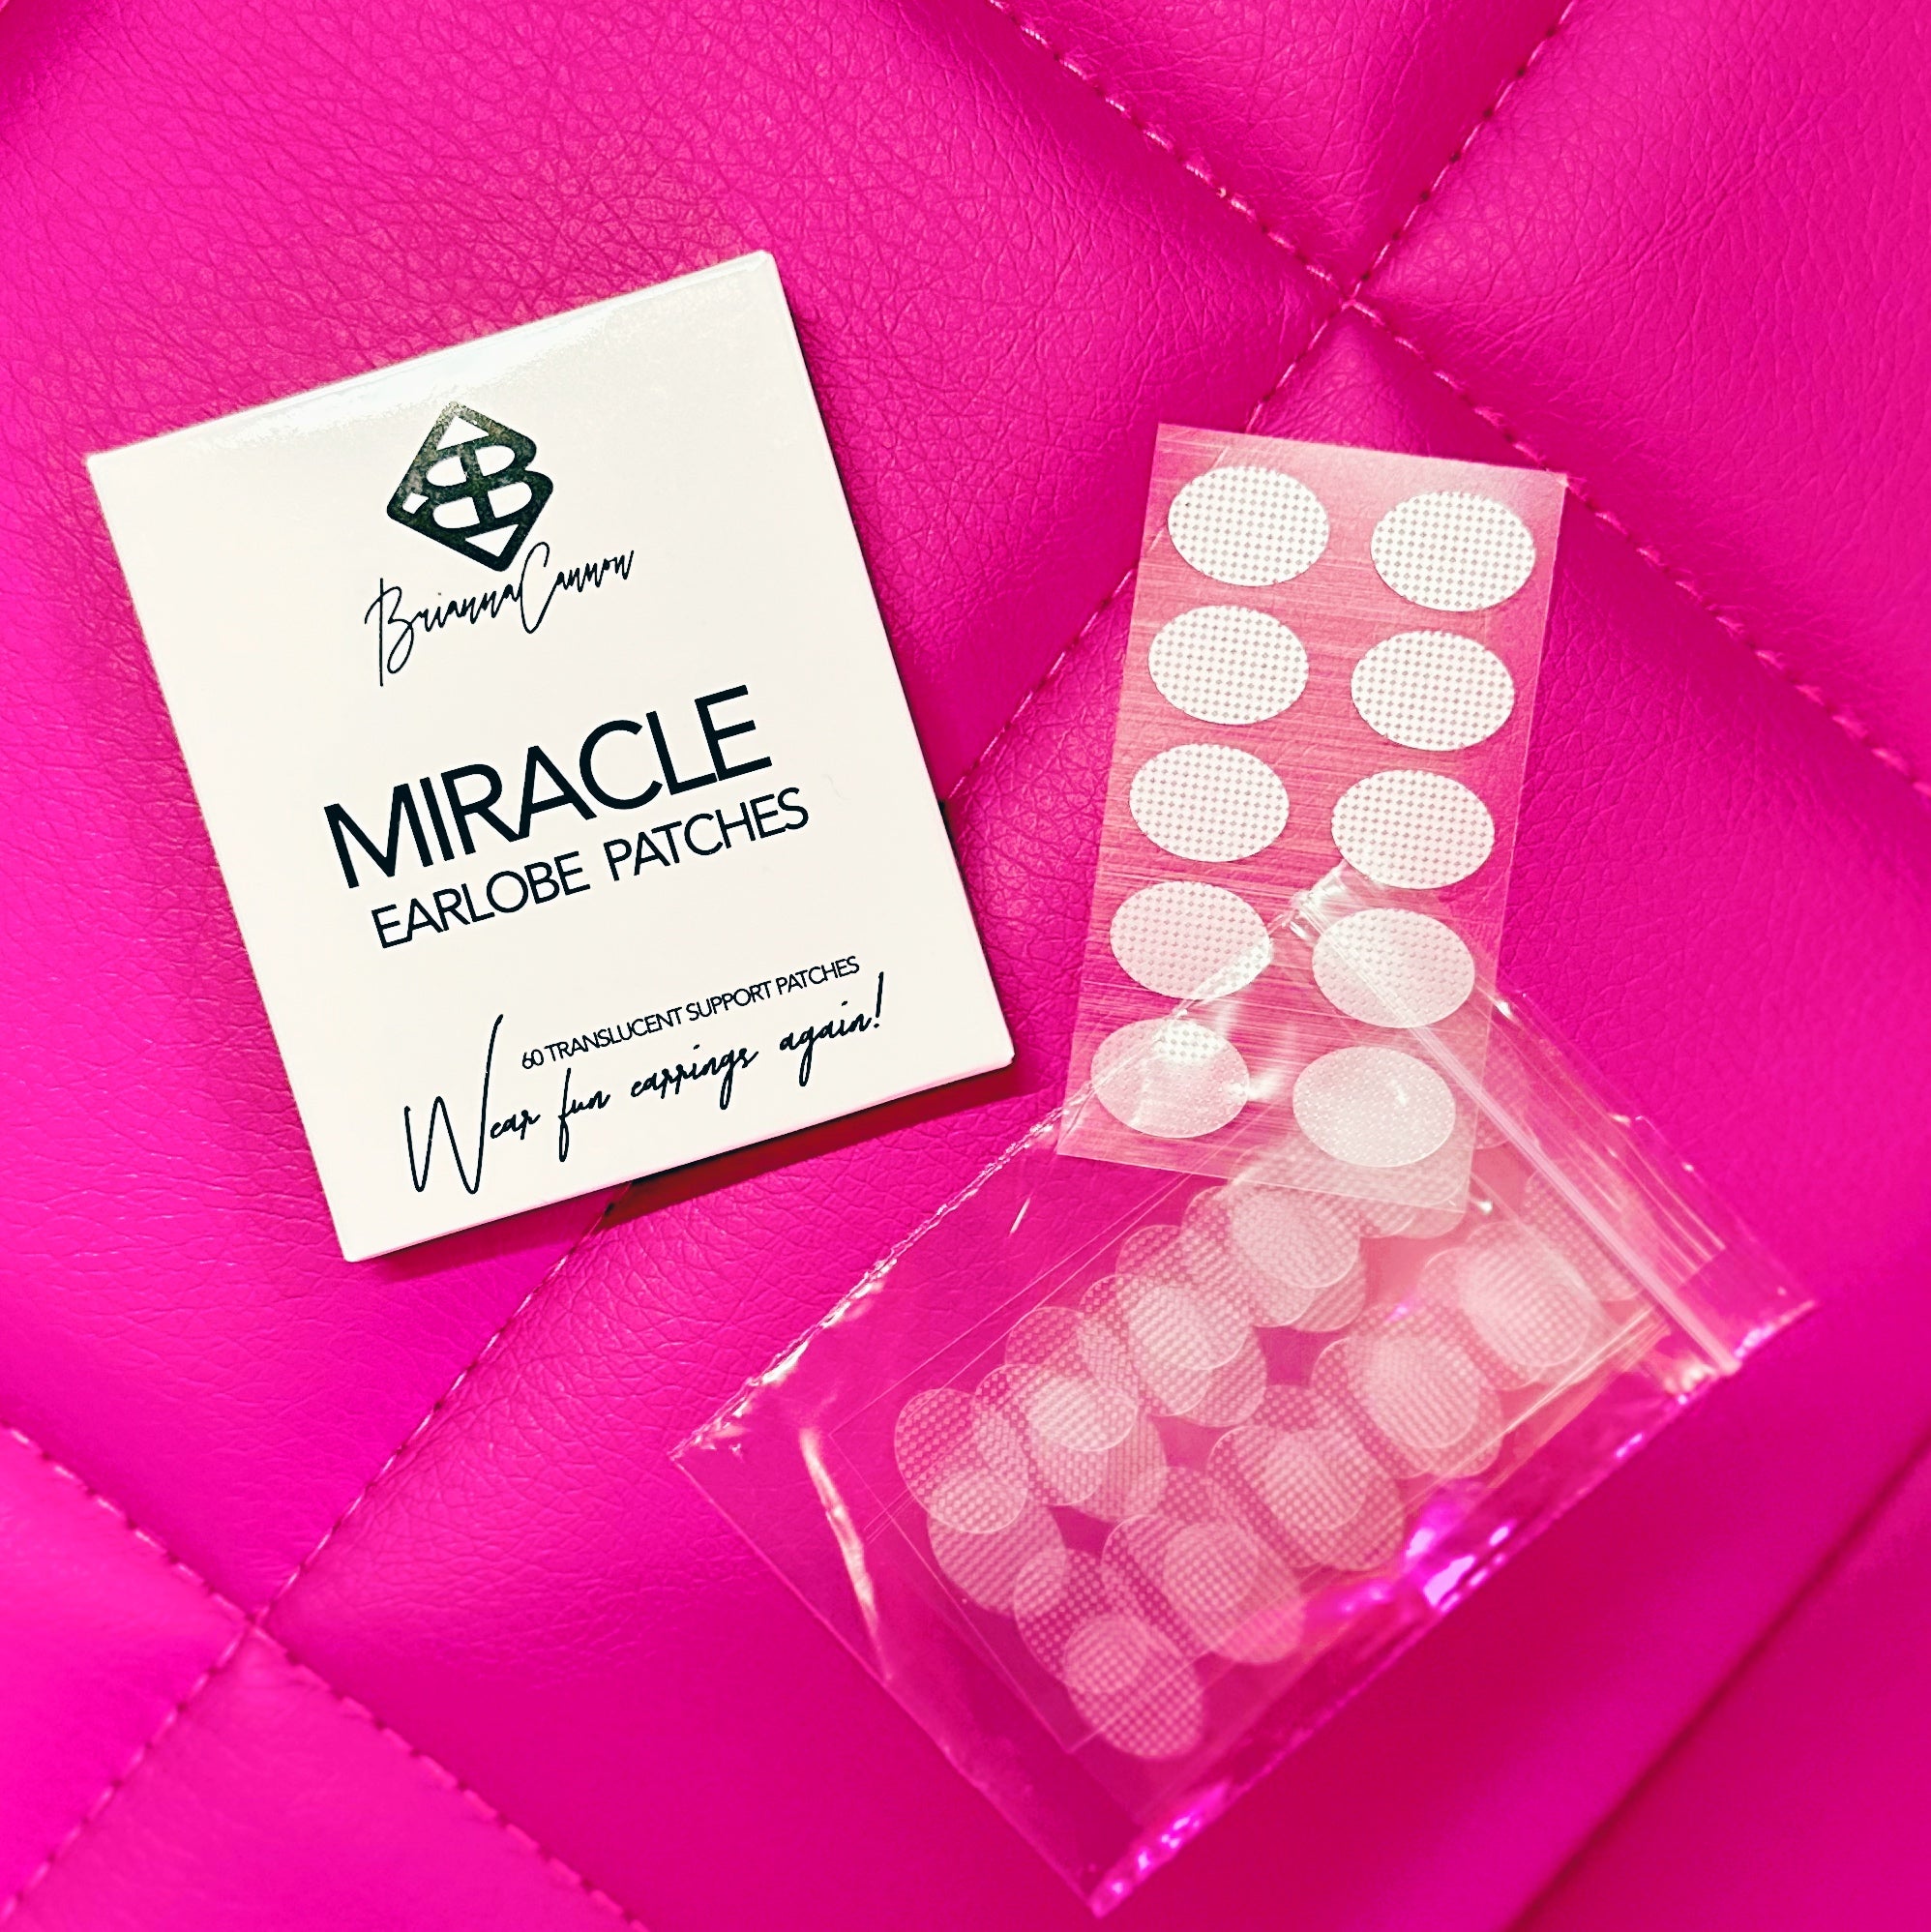 MIRACLE Earlobe Patches (for Stretched or Torn Earlobes) – Brianna Cannon